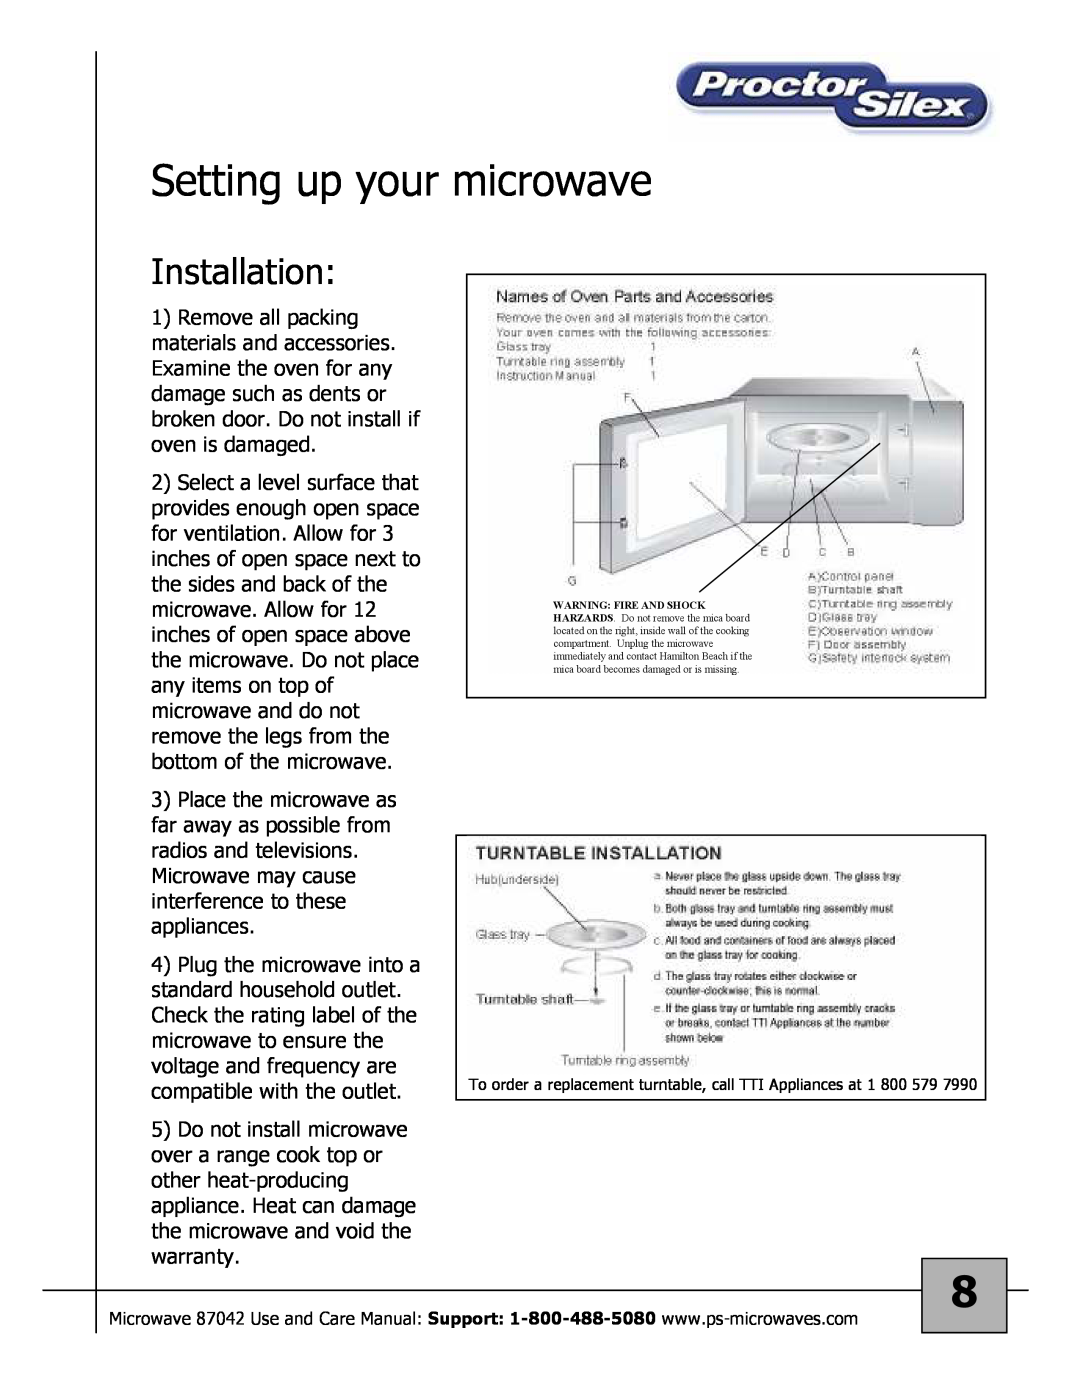 Proctor-Silex 87027 owner manual Setting up your microwave, Installation 